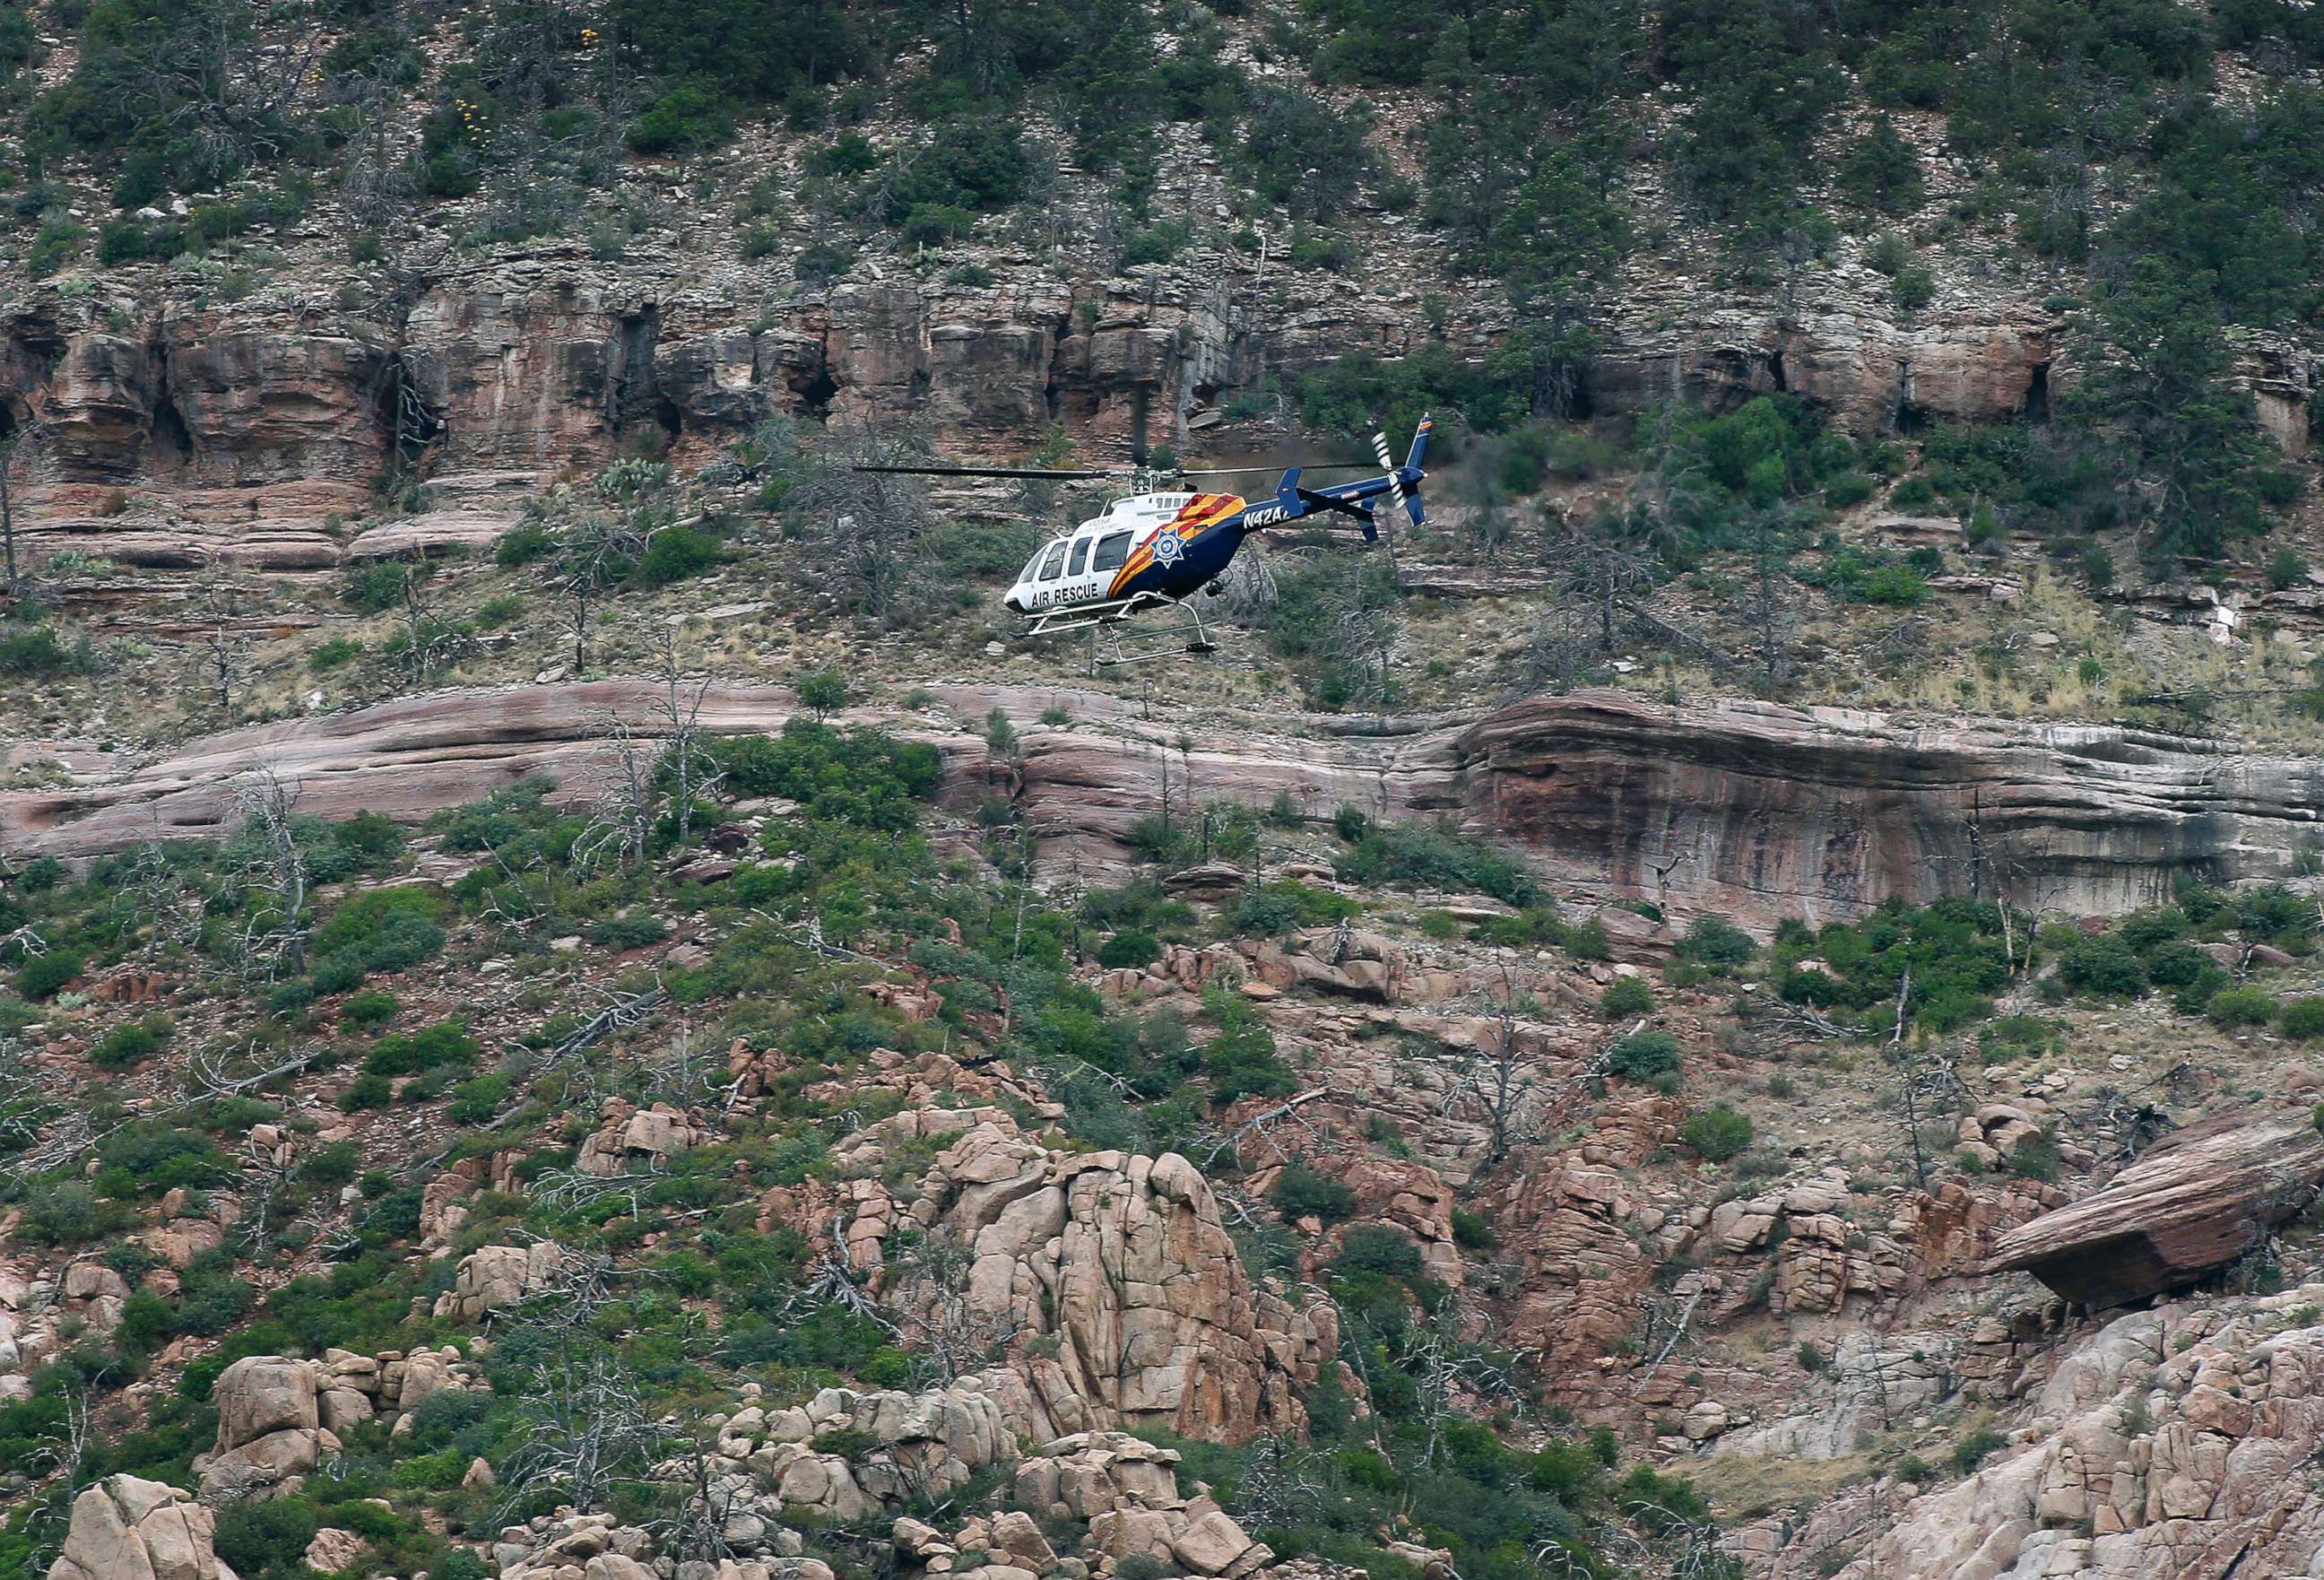 PHOTO: A helicopter flies above the rugged terrain along the banks of the East Verde River during a search and rescue operation for victims of a flash flood, July 16, 2017, in Payson, Ariz.